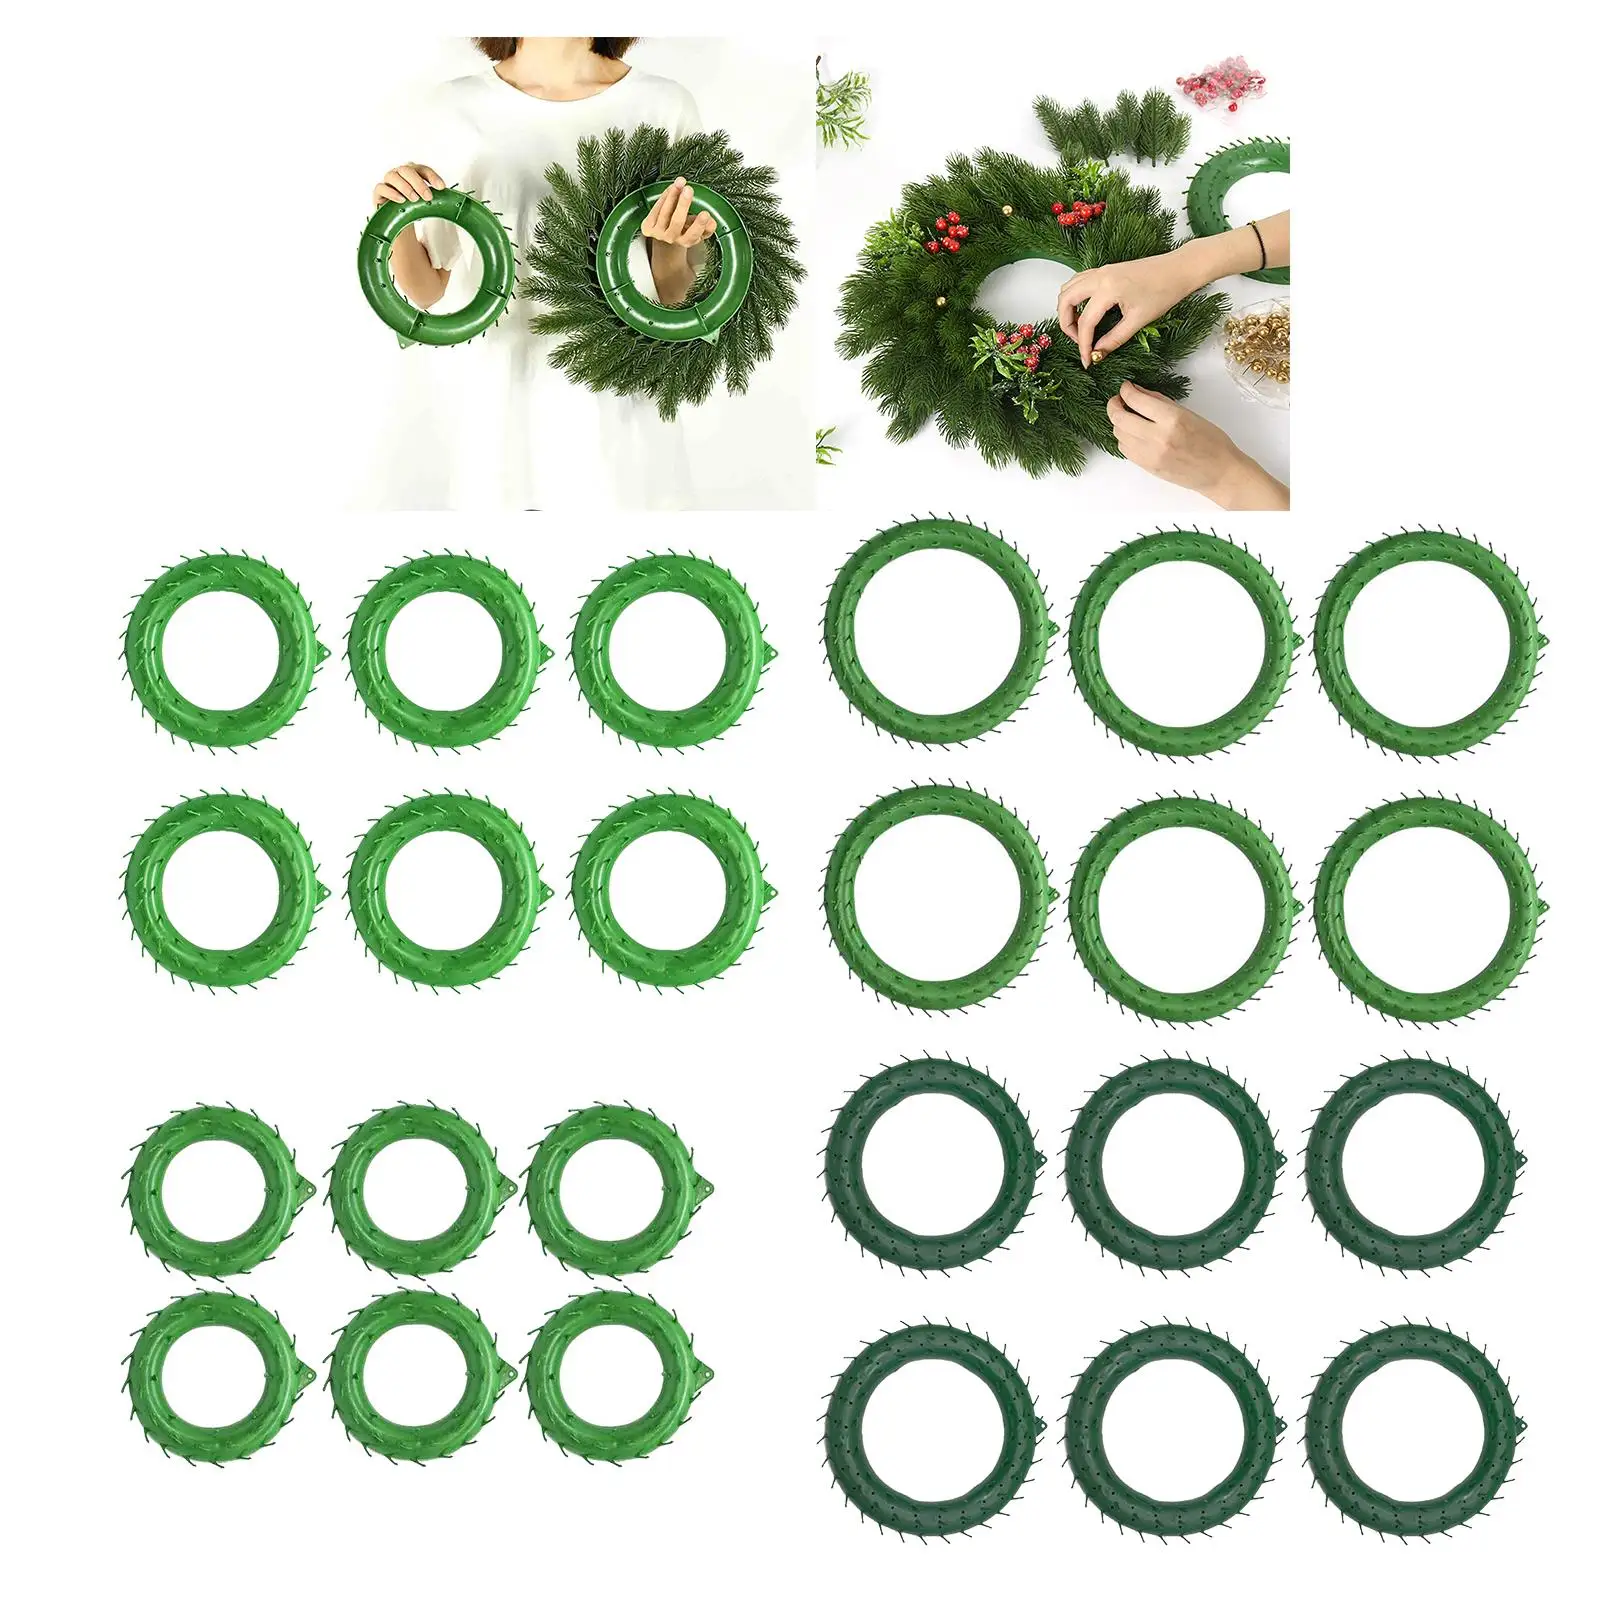 Christmas Garland Household Durable Home Decor Wreath Holder DIY Accessories for Door Ornament Festival Crafts